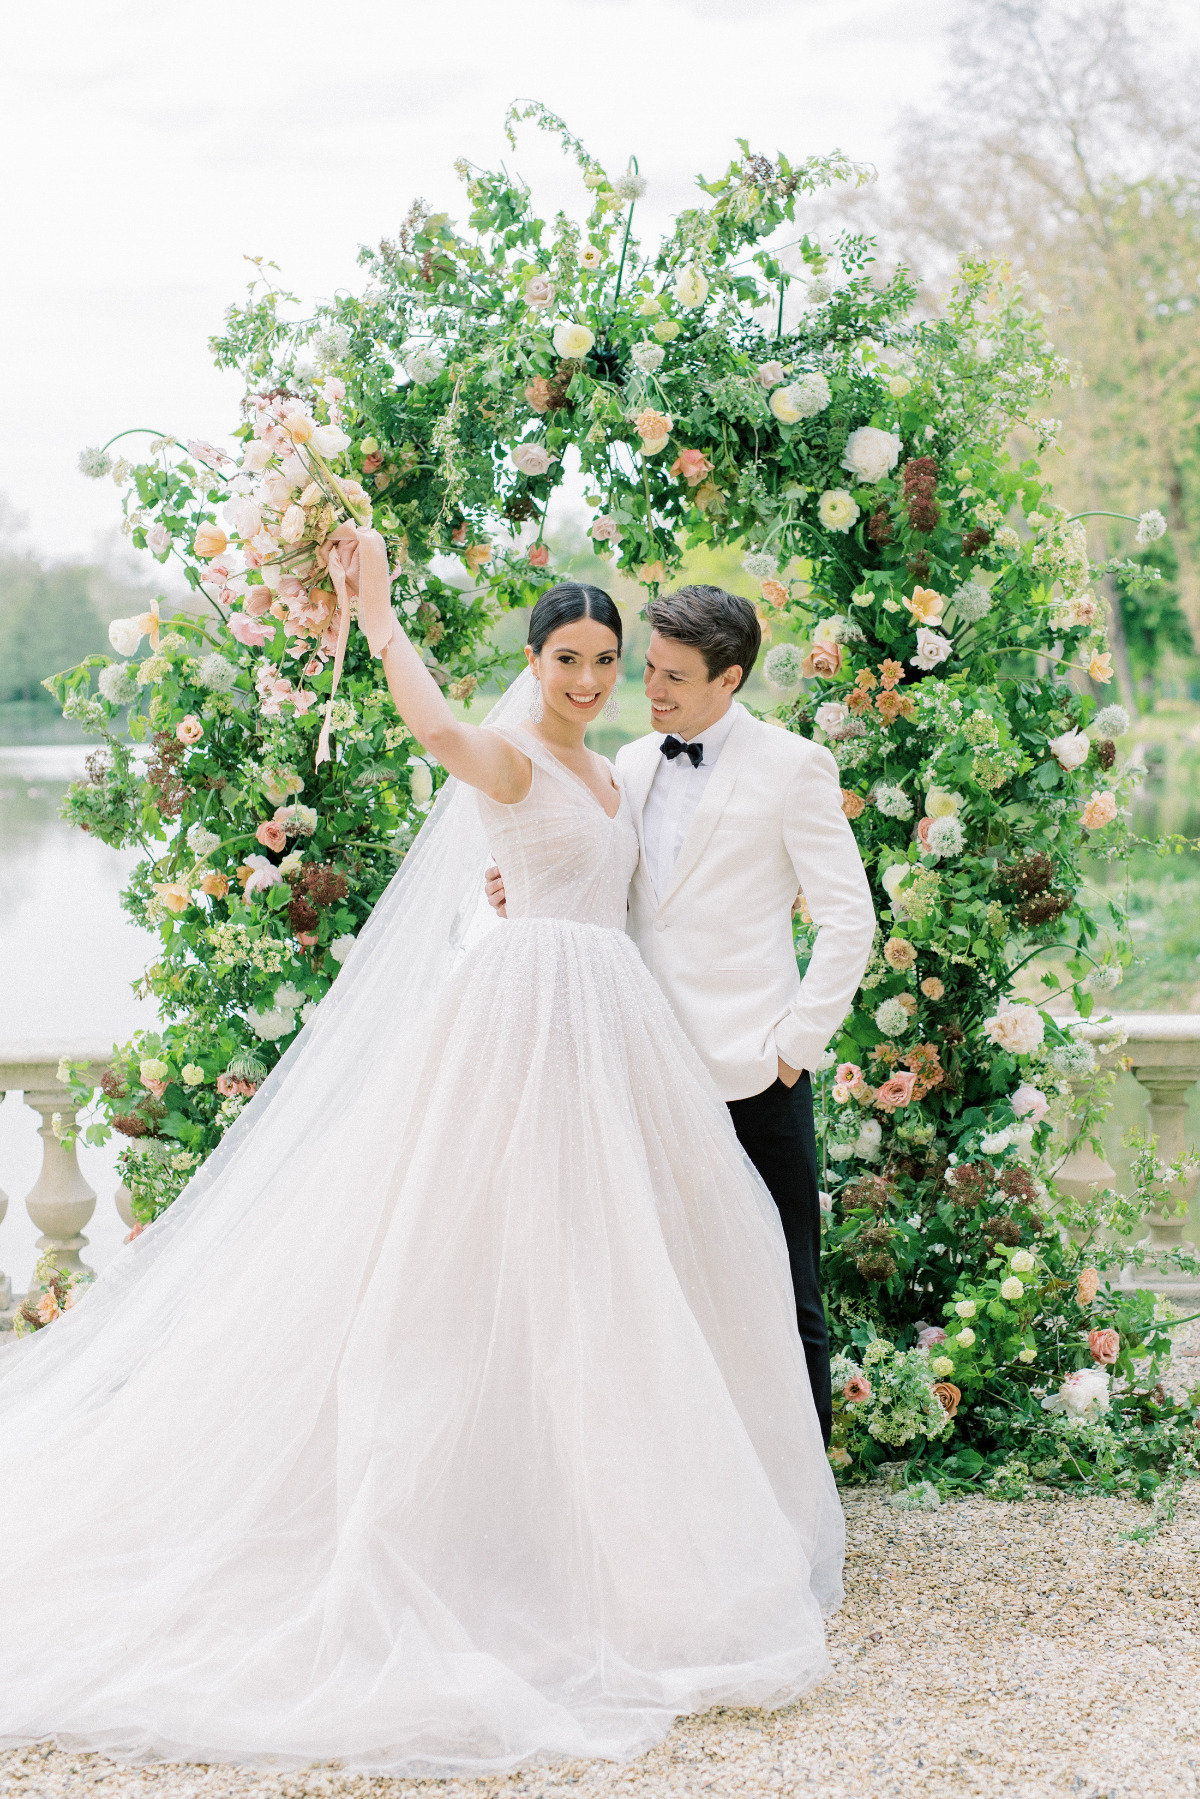 Dreamy Summer Editorial At A French ChÃ¢teau With A Show-Stopping Orange Sherbert Gown